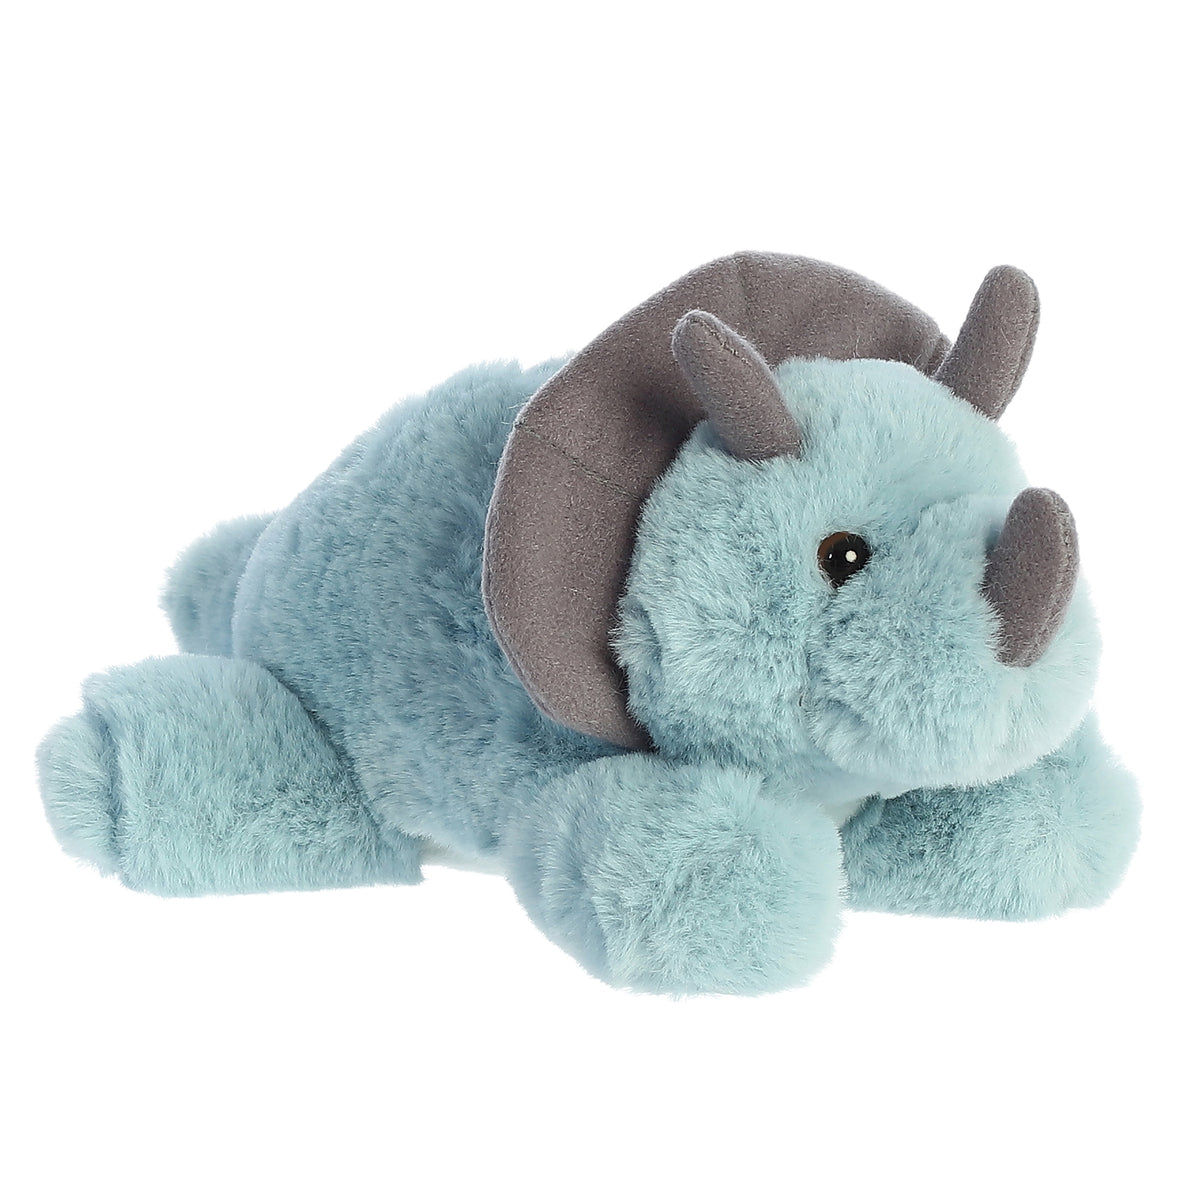 Adorable light blue Triceratops dinosaur plushie with dark gray horns ready for playful adventures and cuddles.